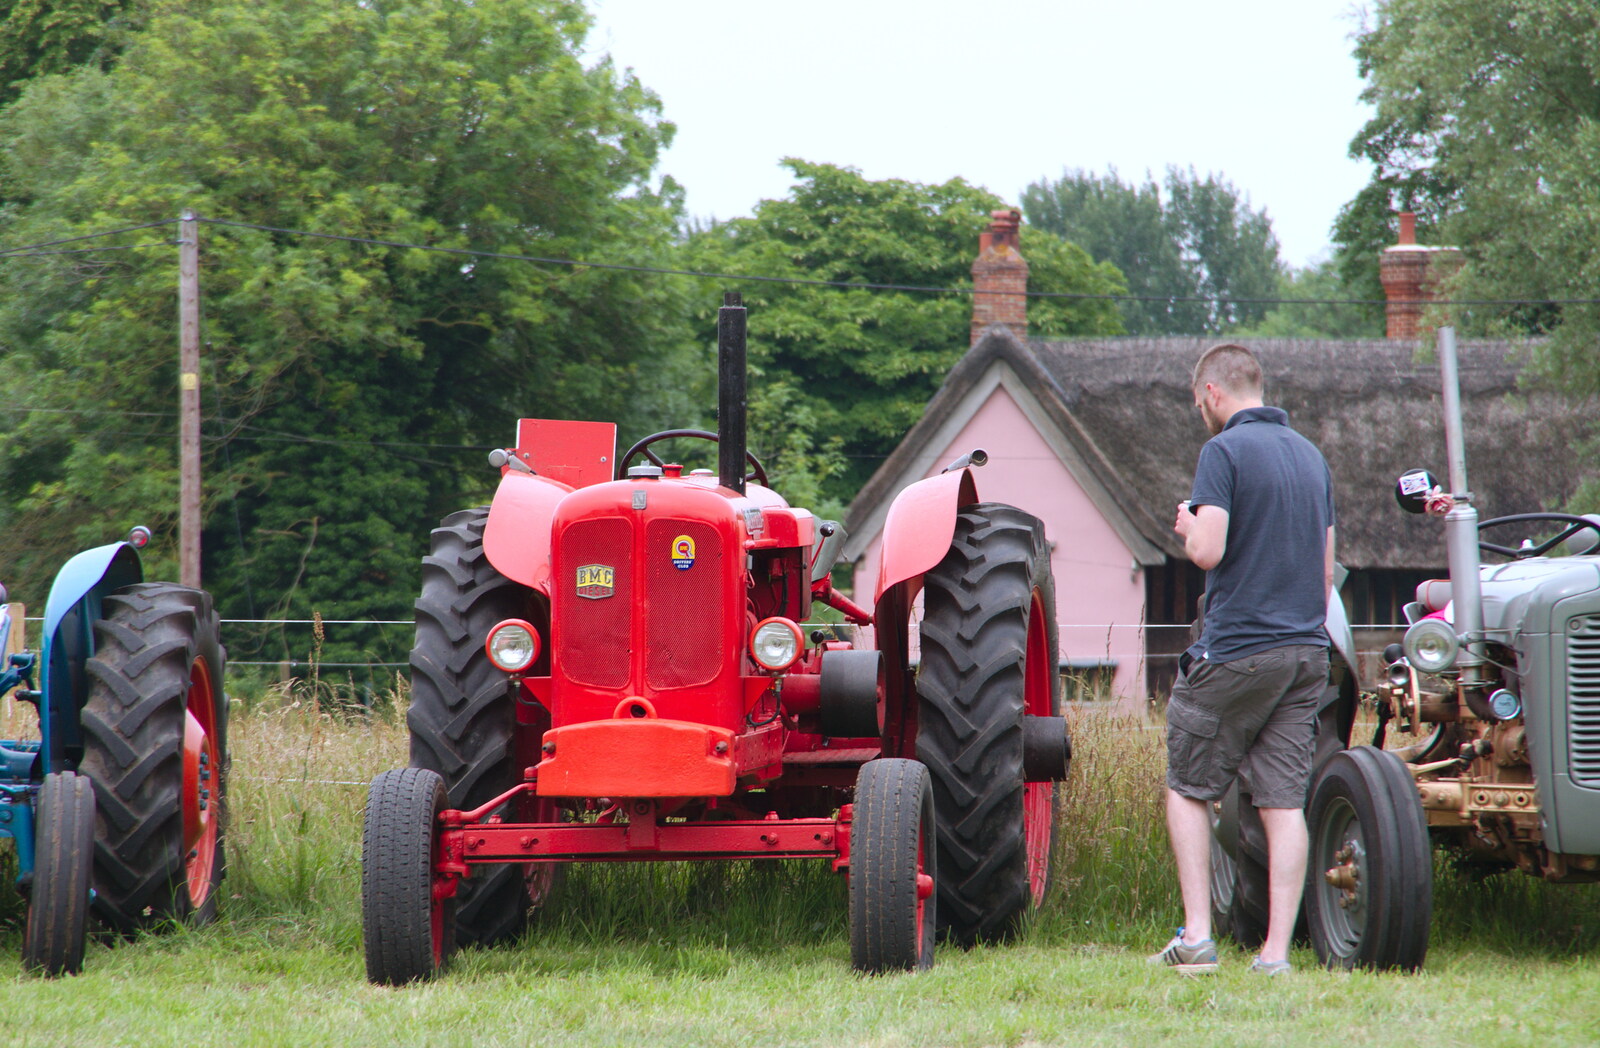 The Boy Phil inspects tractors from A Hog Roast on Little Green, Thrandeston, Suffolk - 23rd June 2019